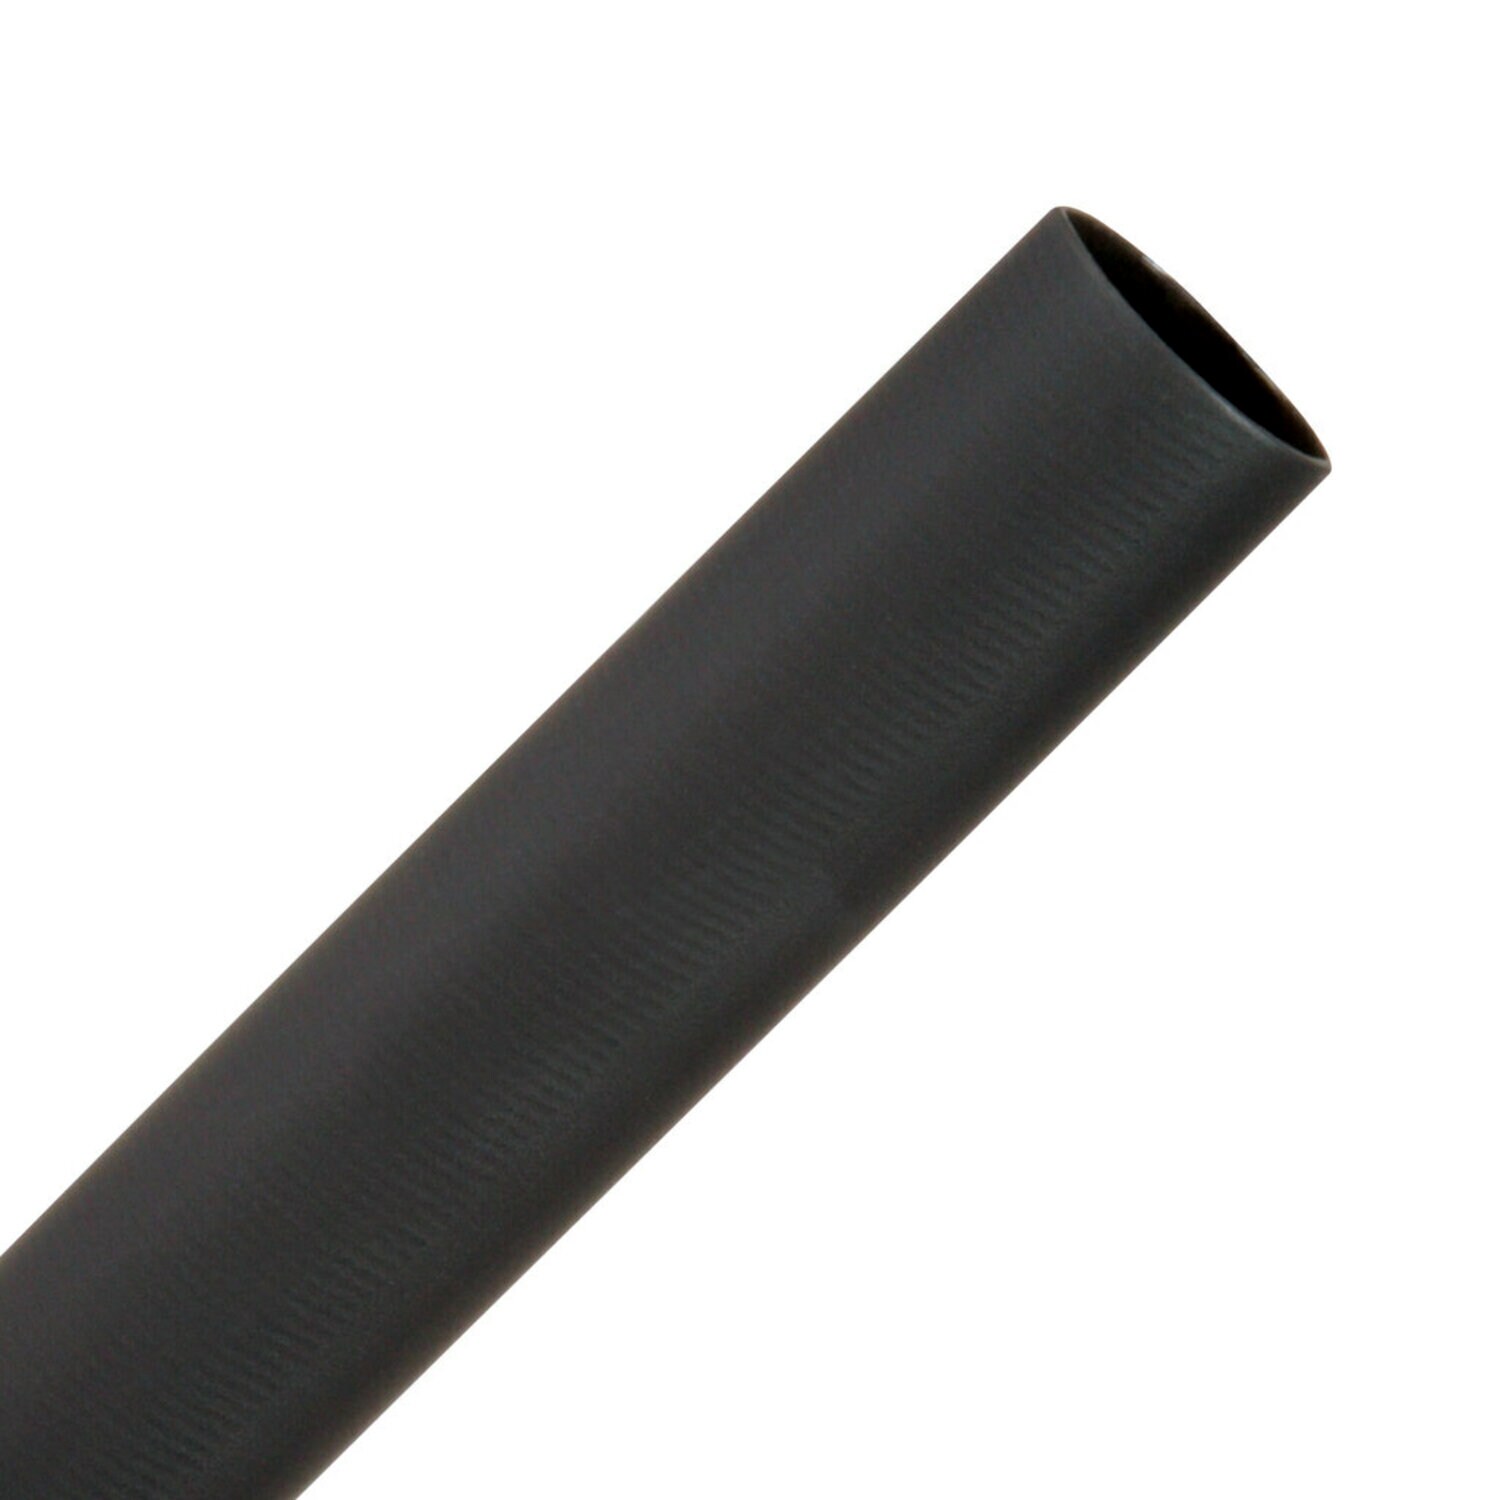 7100049966 - 3M Thin-Wall Heat Shrink Tubing EPS-300, Adhesive-Lined, 1/2-6"-Black,
6 in length sticks, 10 pieces/pack, 10 packs/case